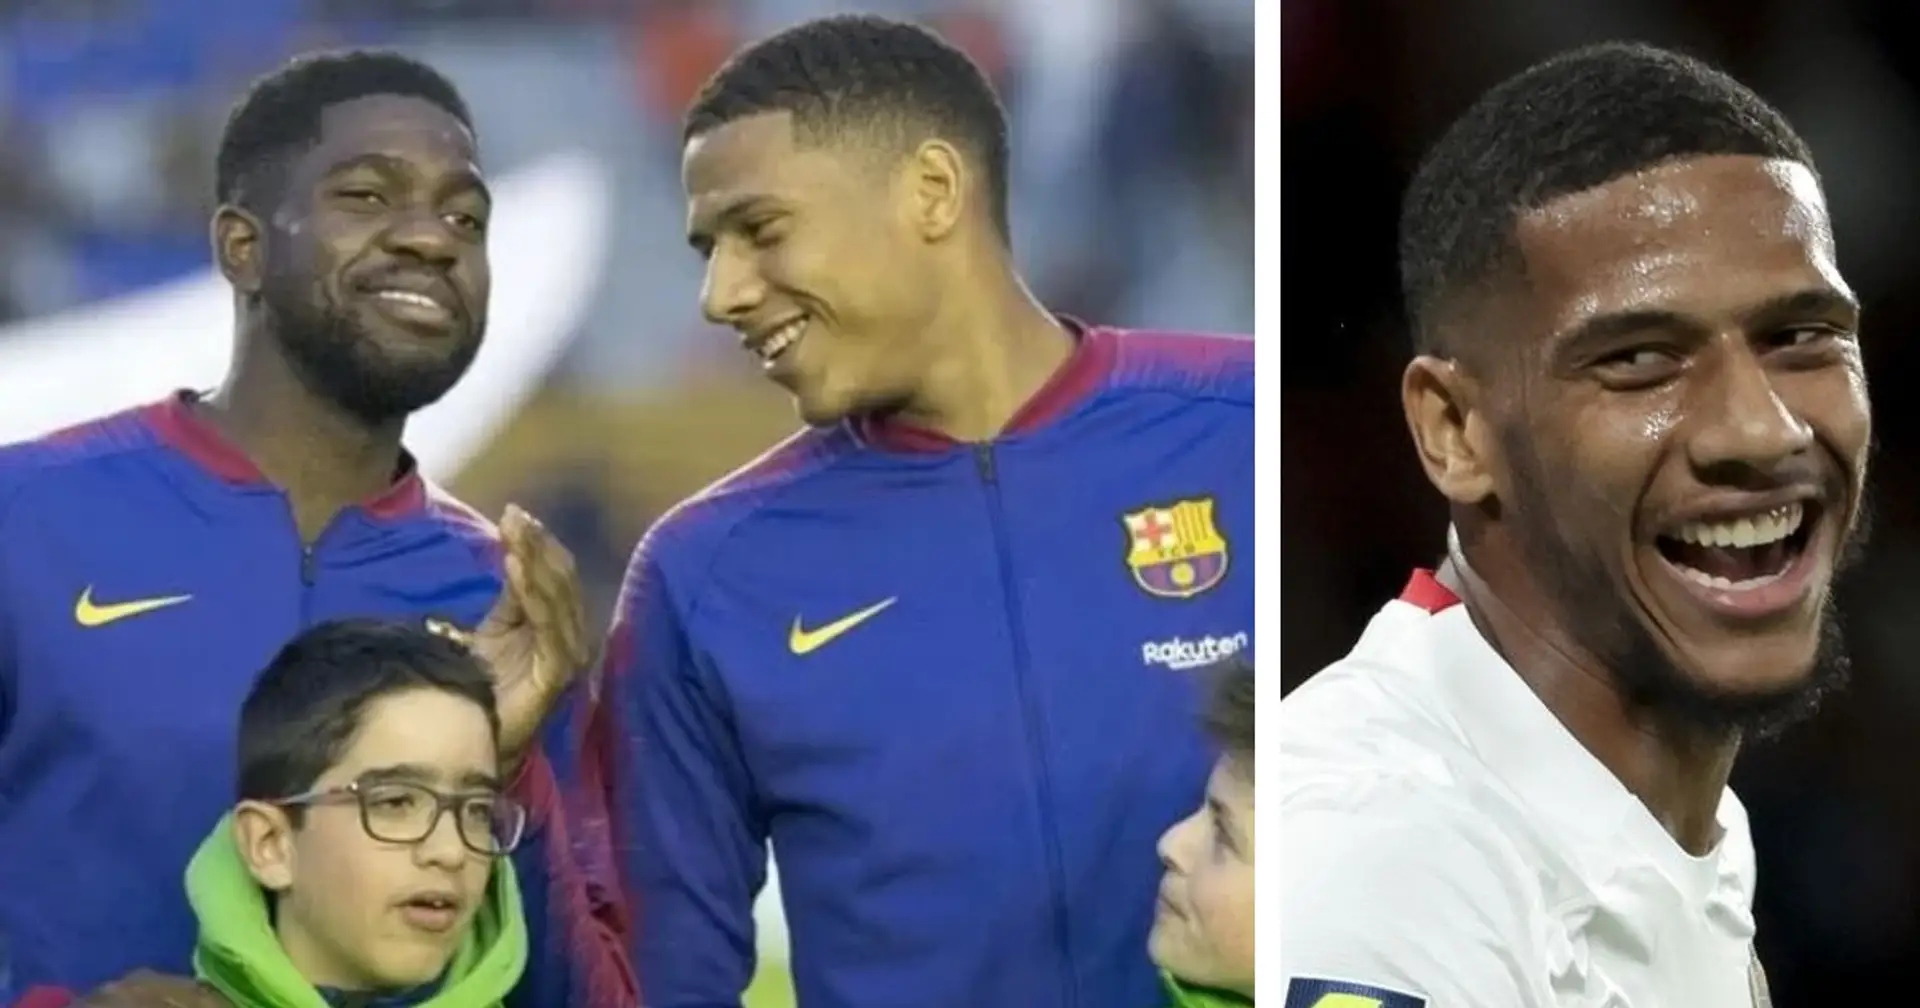 Jean-Clair Todibo reveals what he learned from Umtiti, two others ahead of potential Barca return